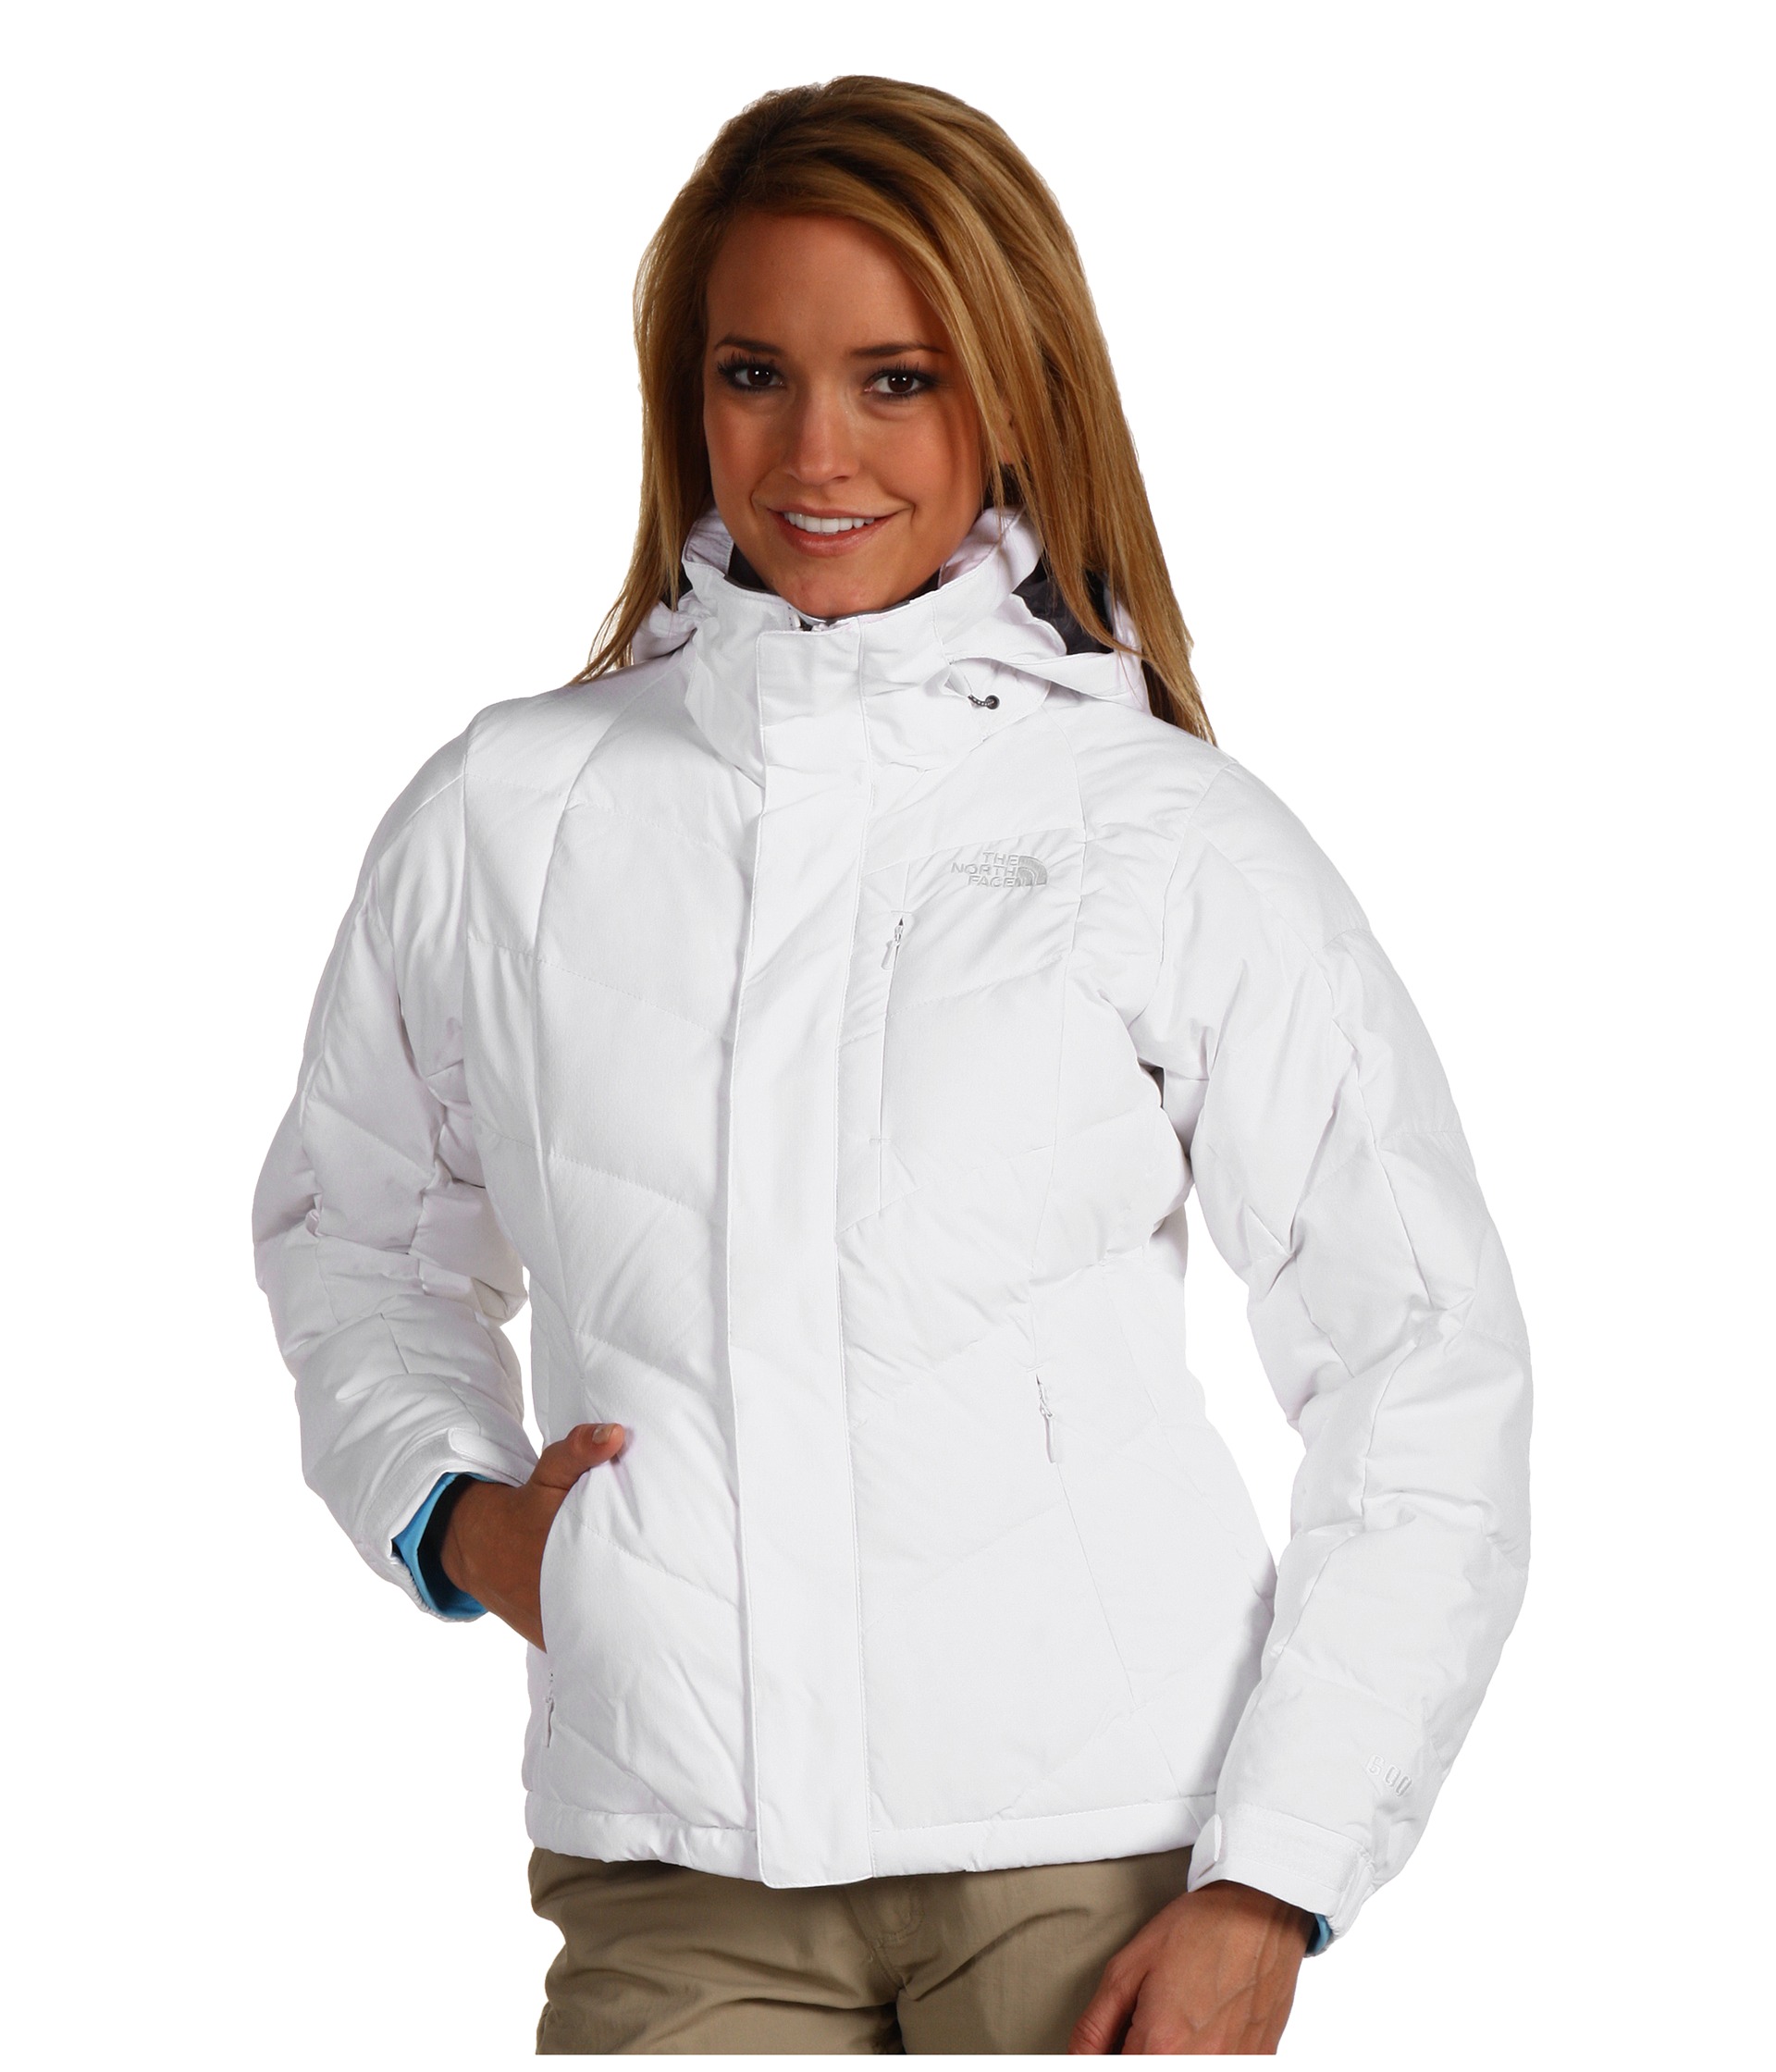 The North Face Womens Amore Down Jacket SKU #7783223